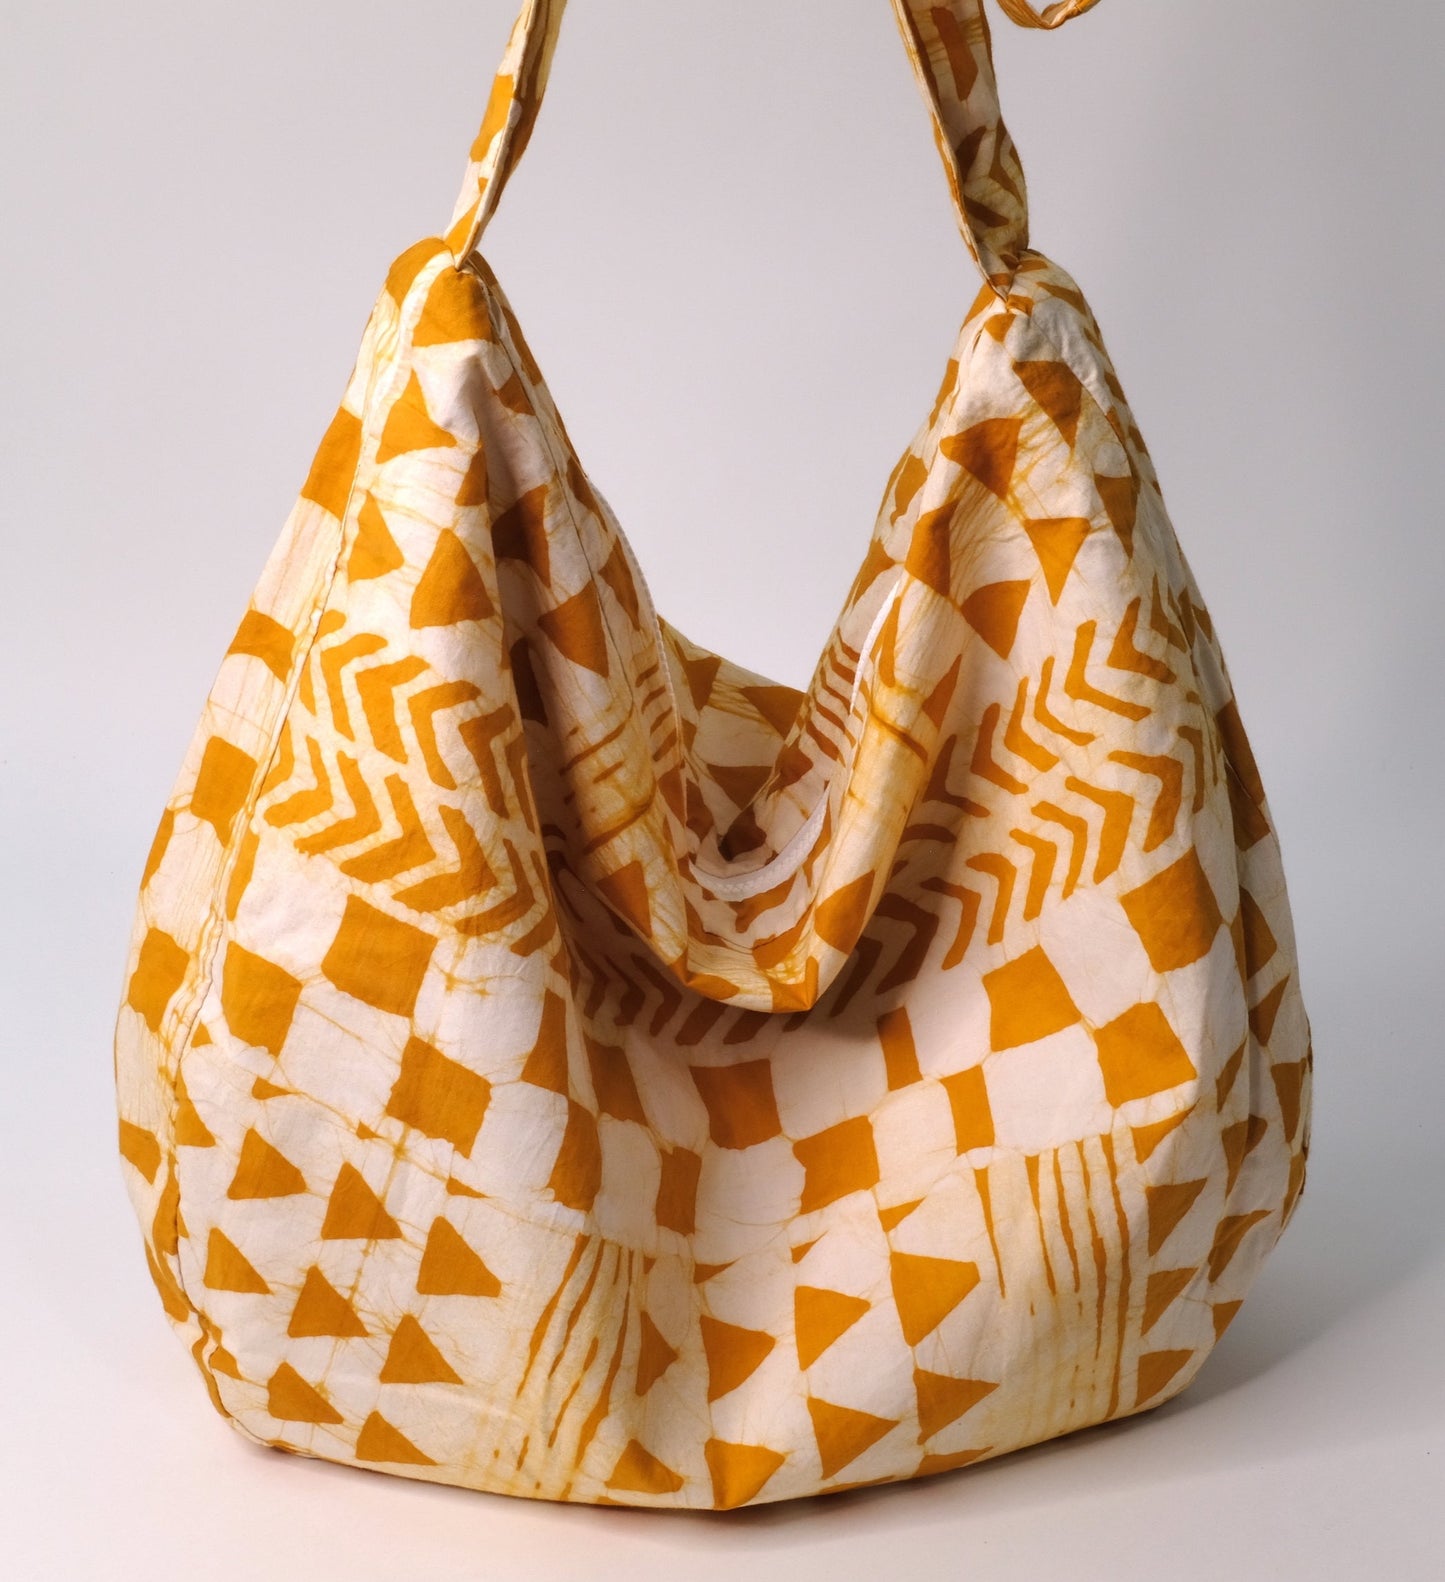 Large cross body bag with yellow arrow pattern.